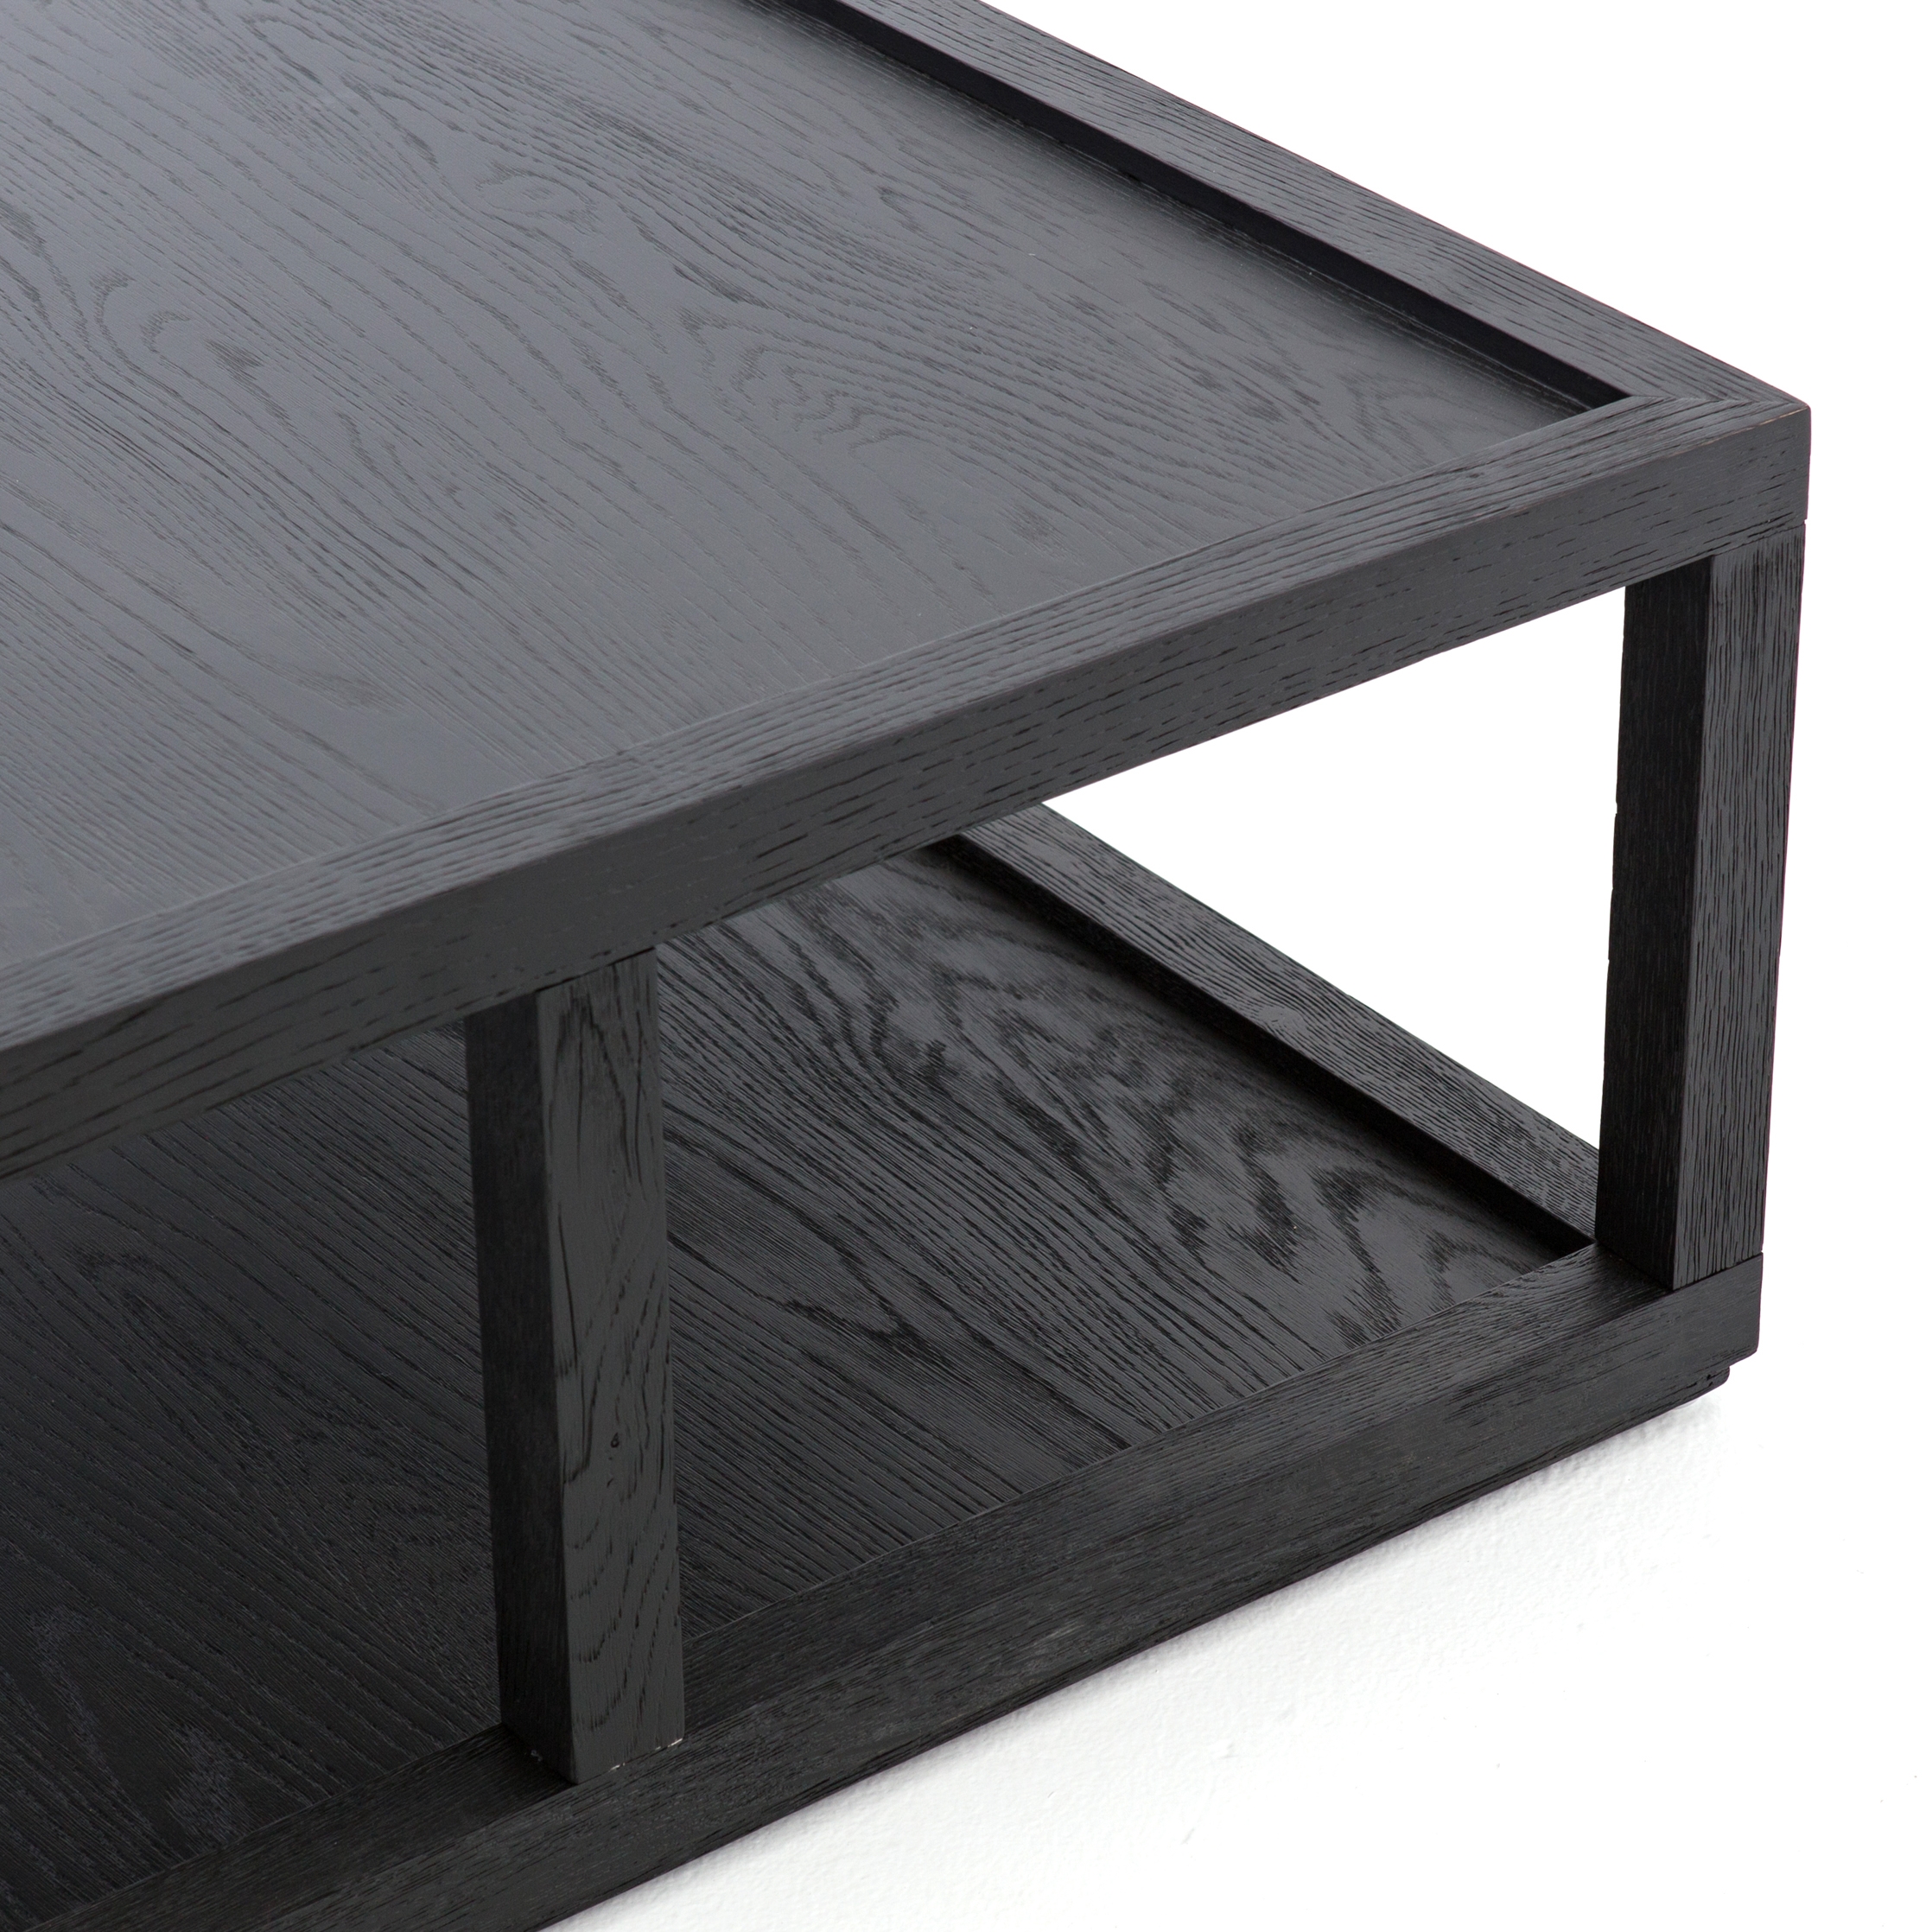 Charley Coffee Table-Drifted Black - Image 10